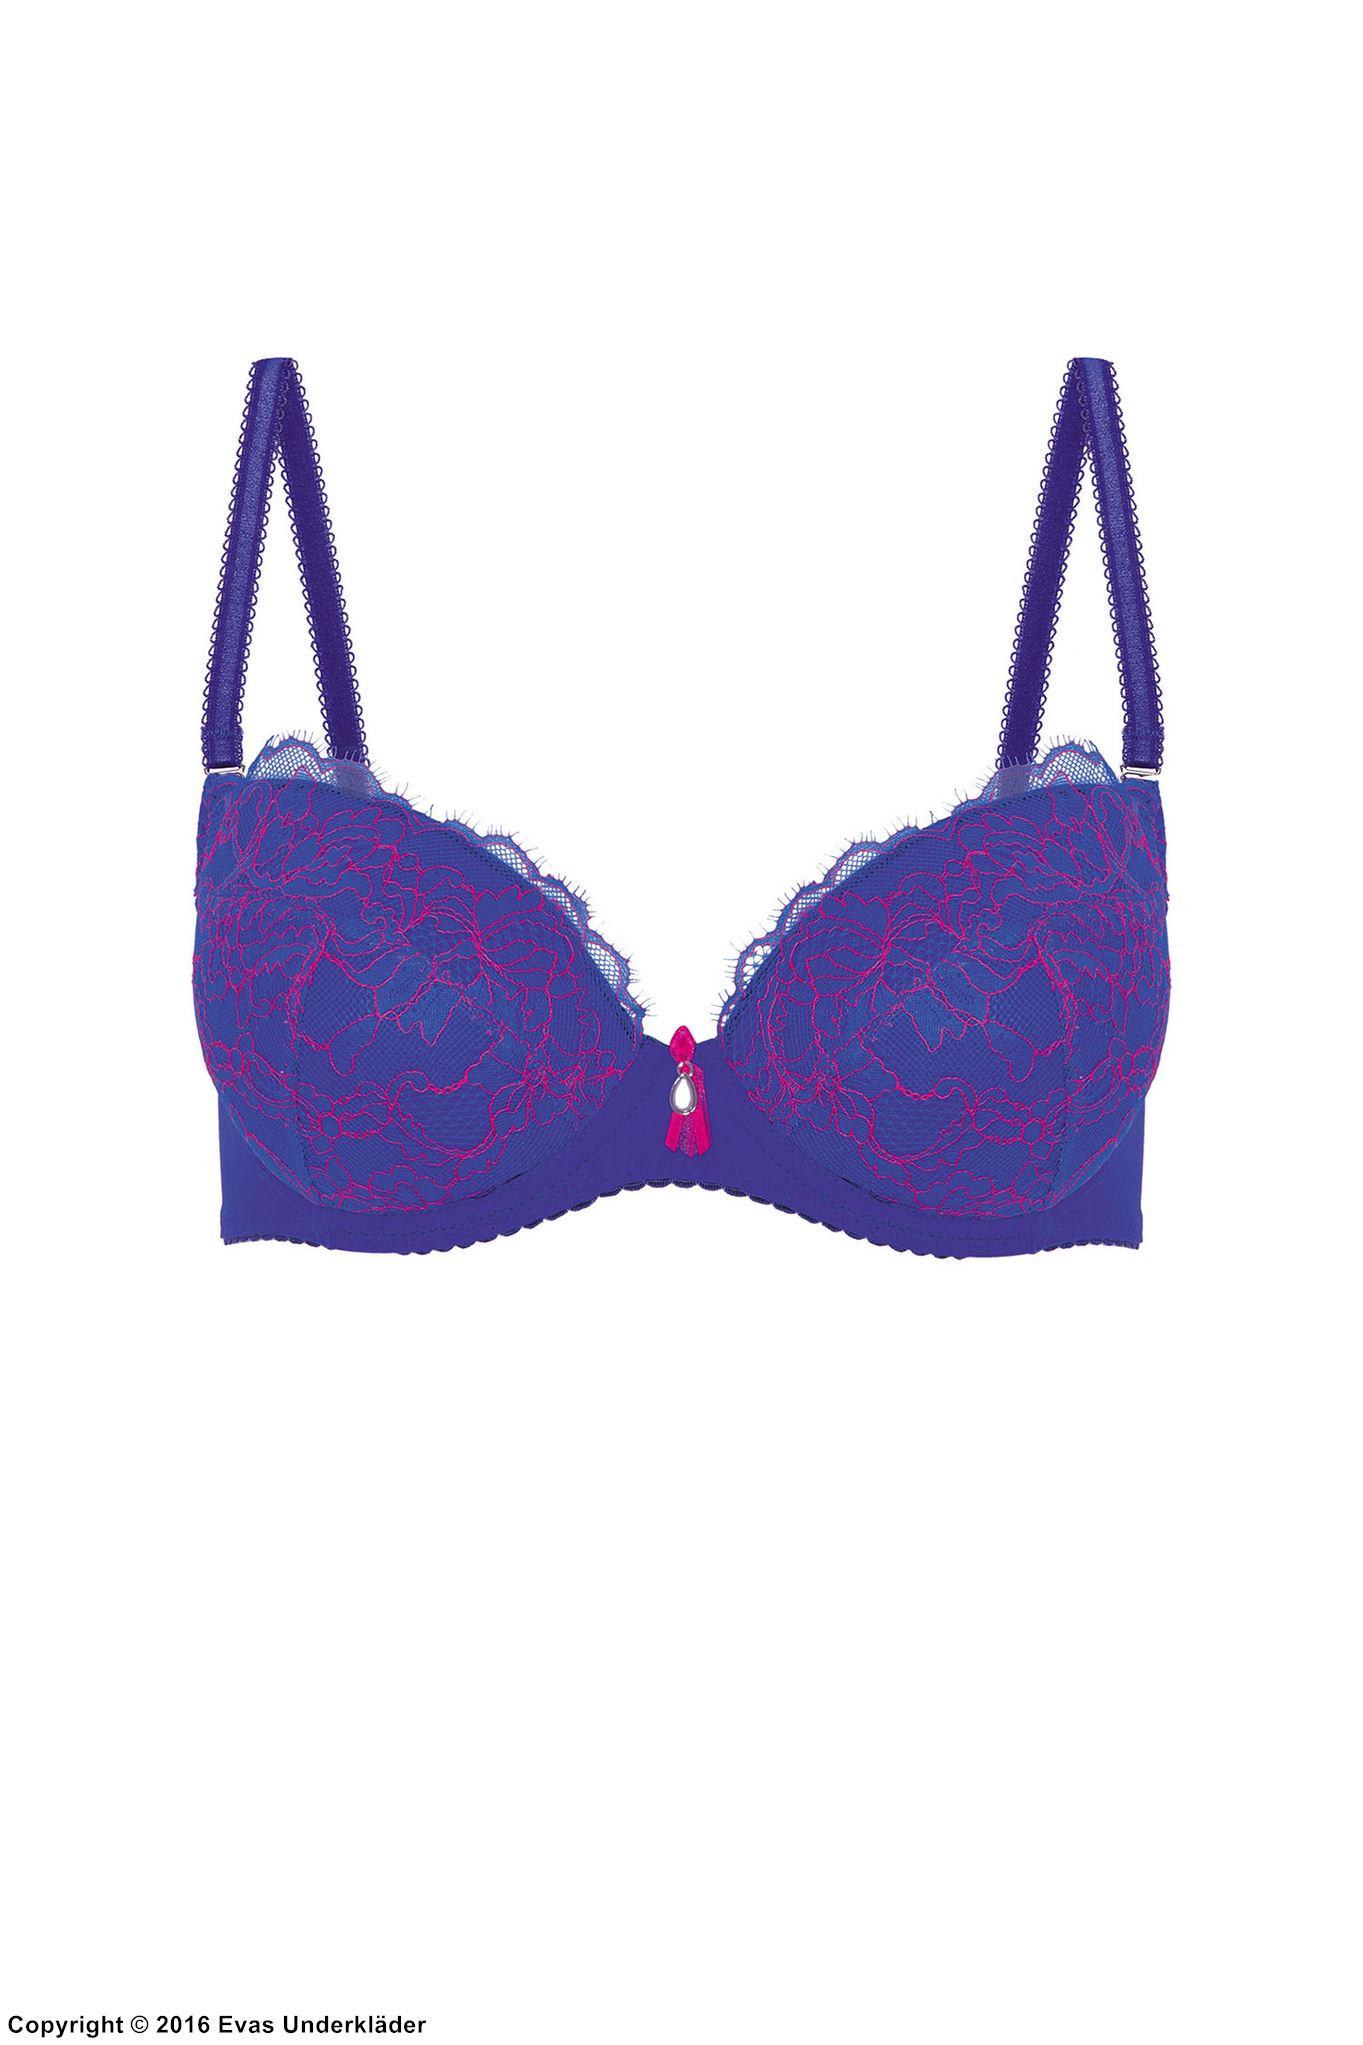 Push-up bra, lace cups, cheerful colors